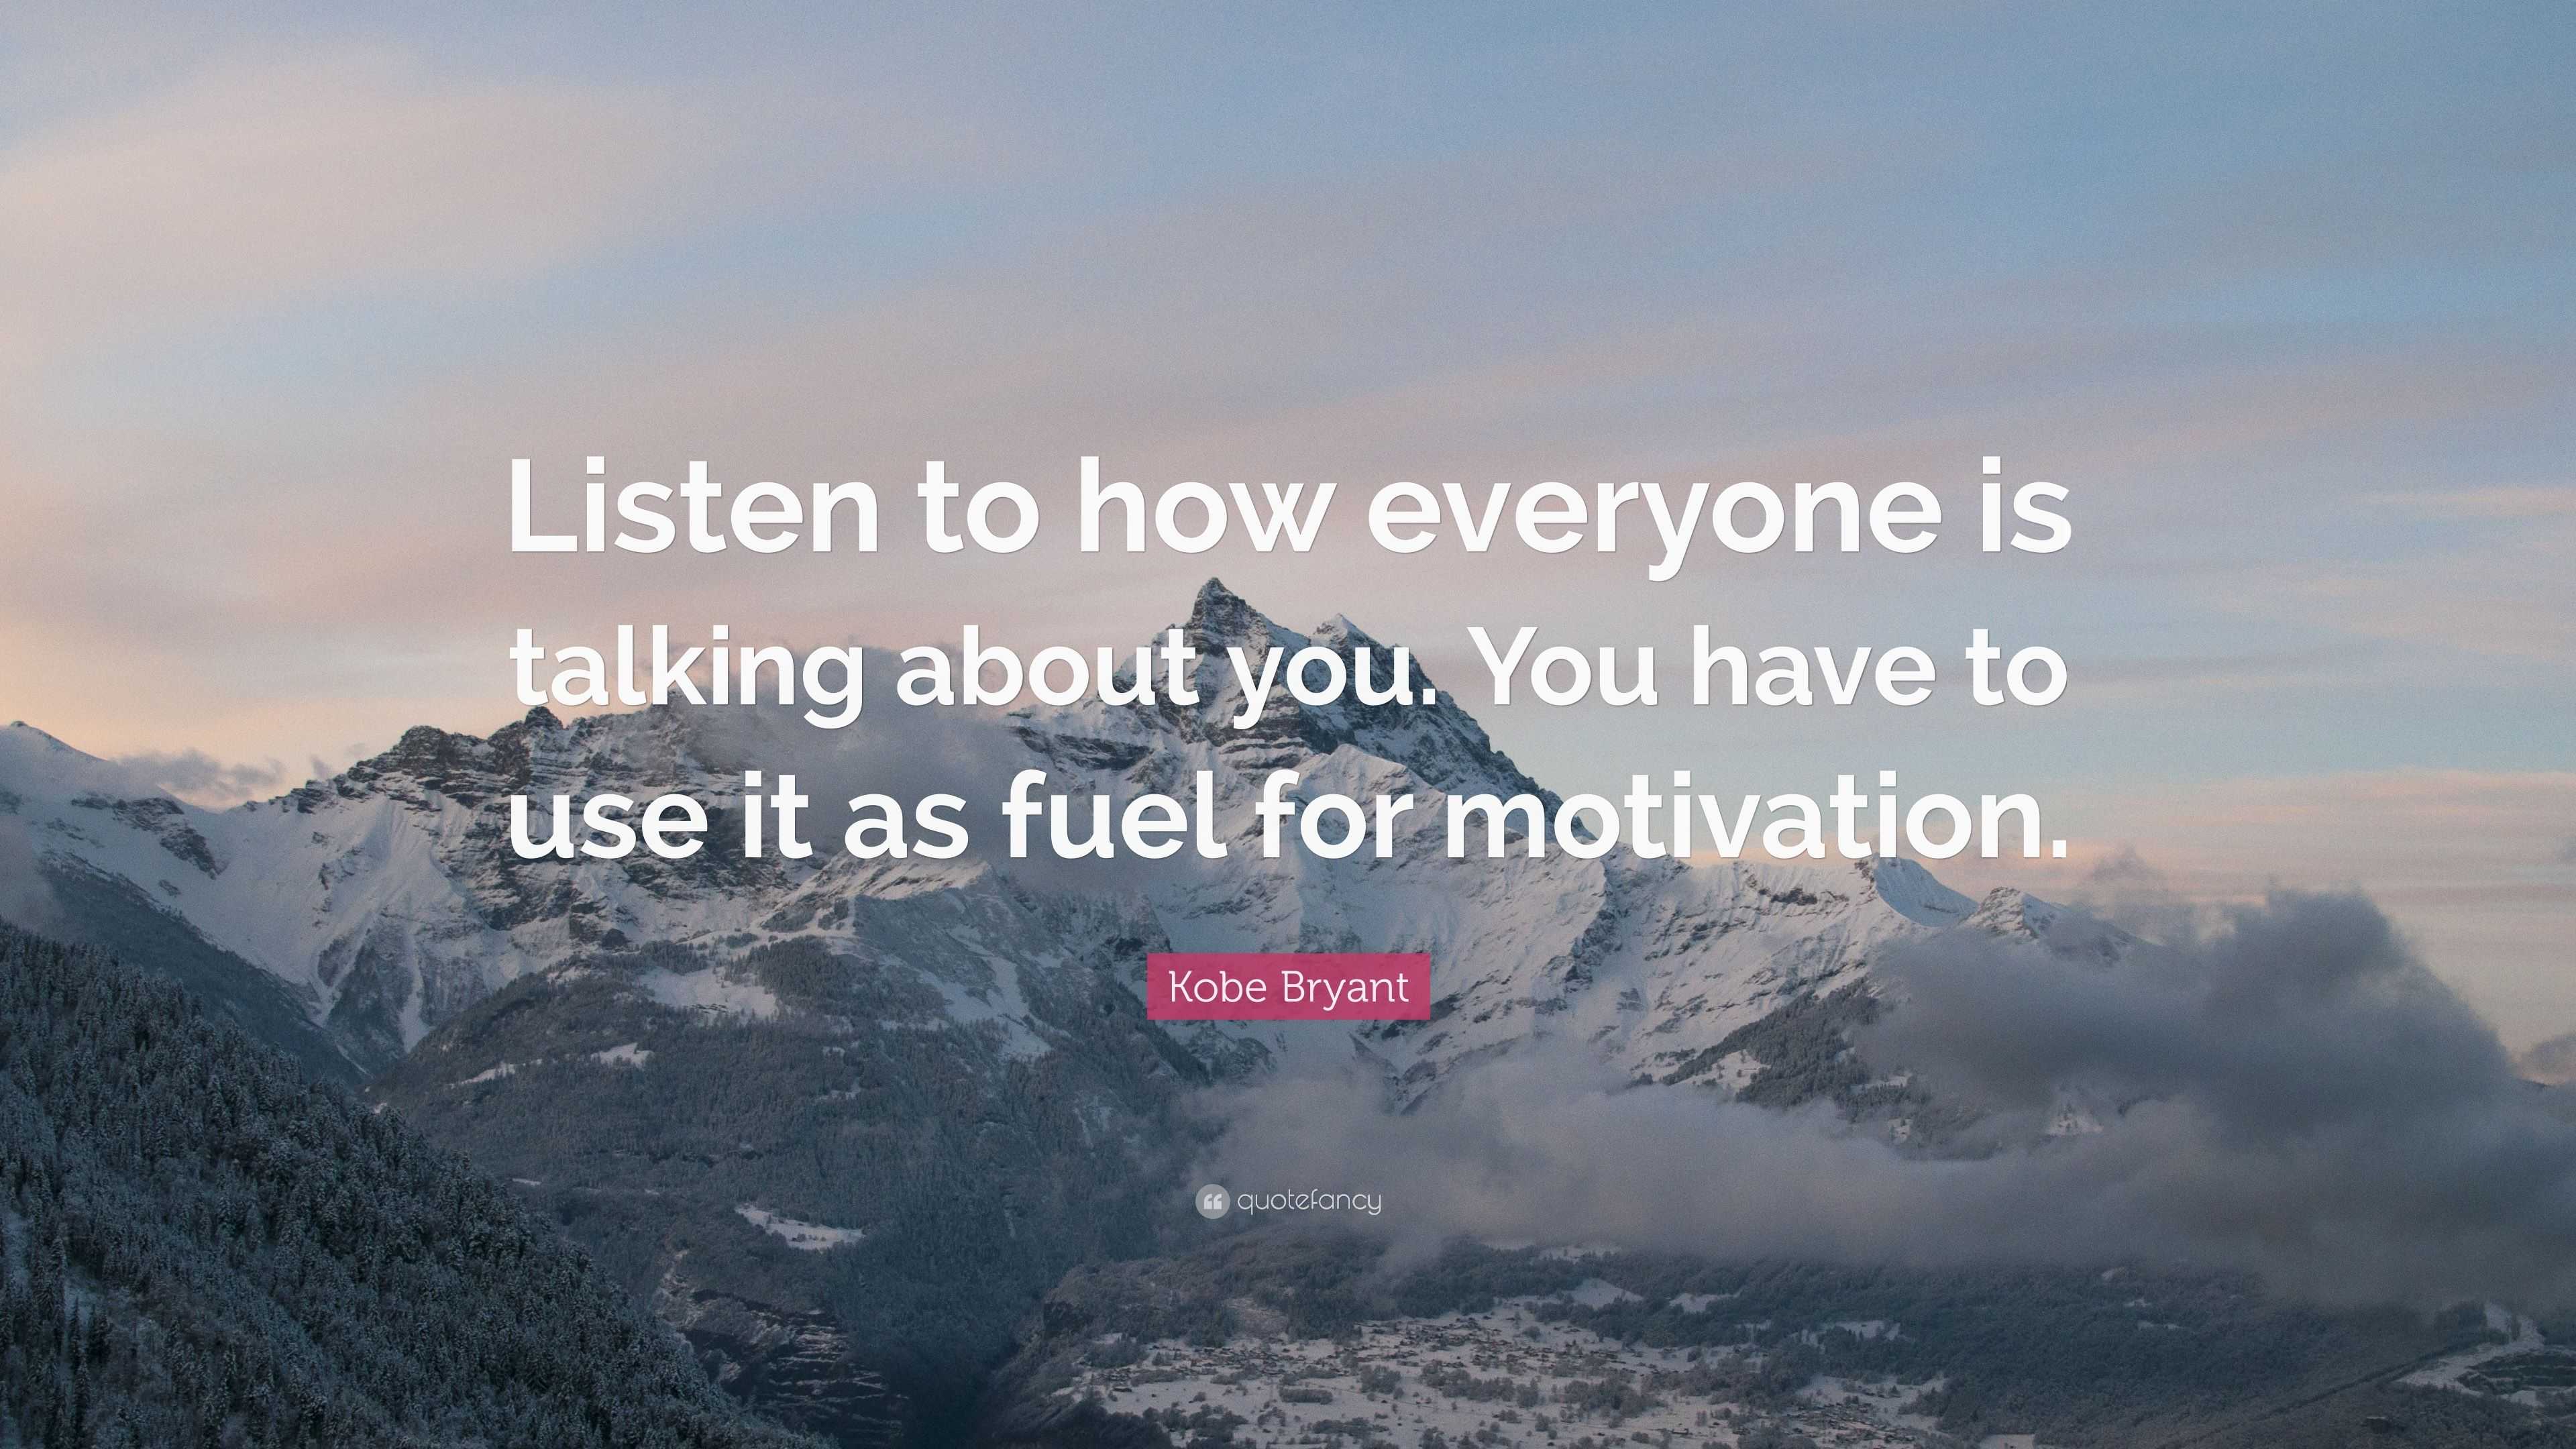 Kobe Bryant Quote: “Listen to how everyone is talking about you. You ...